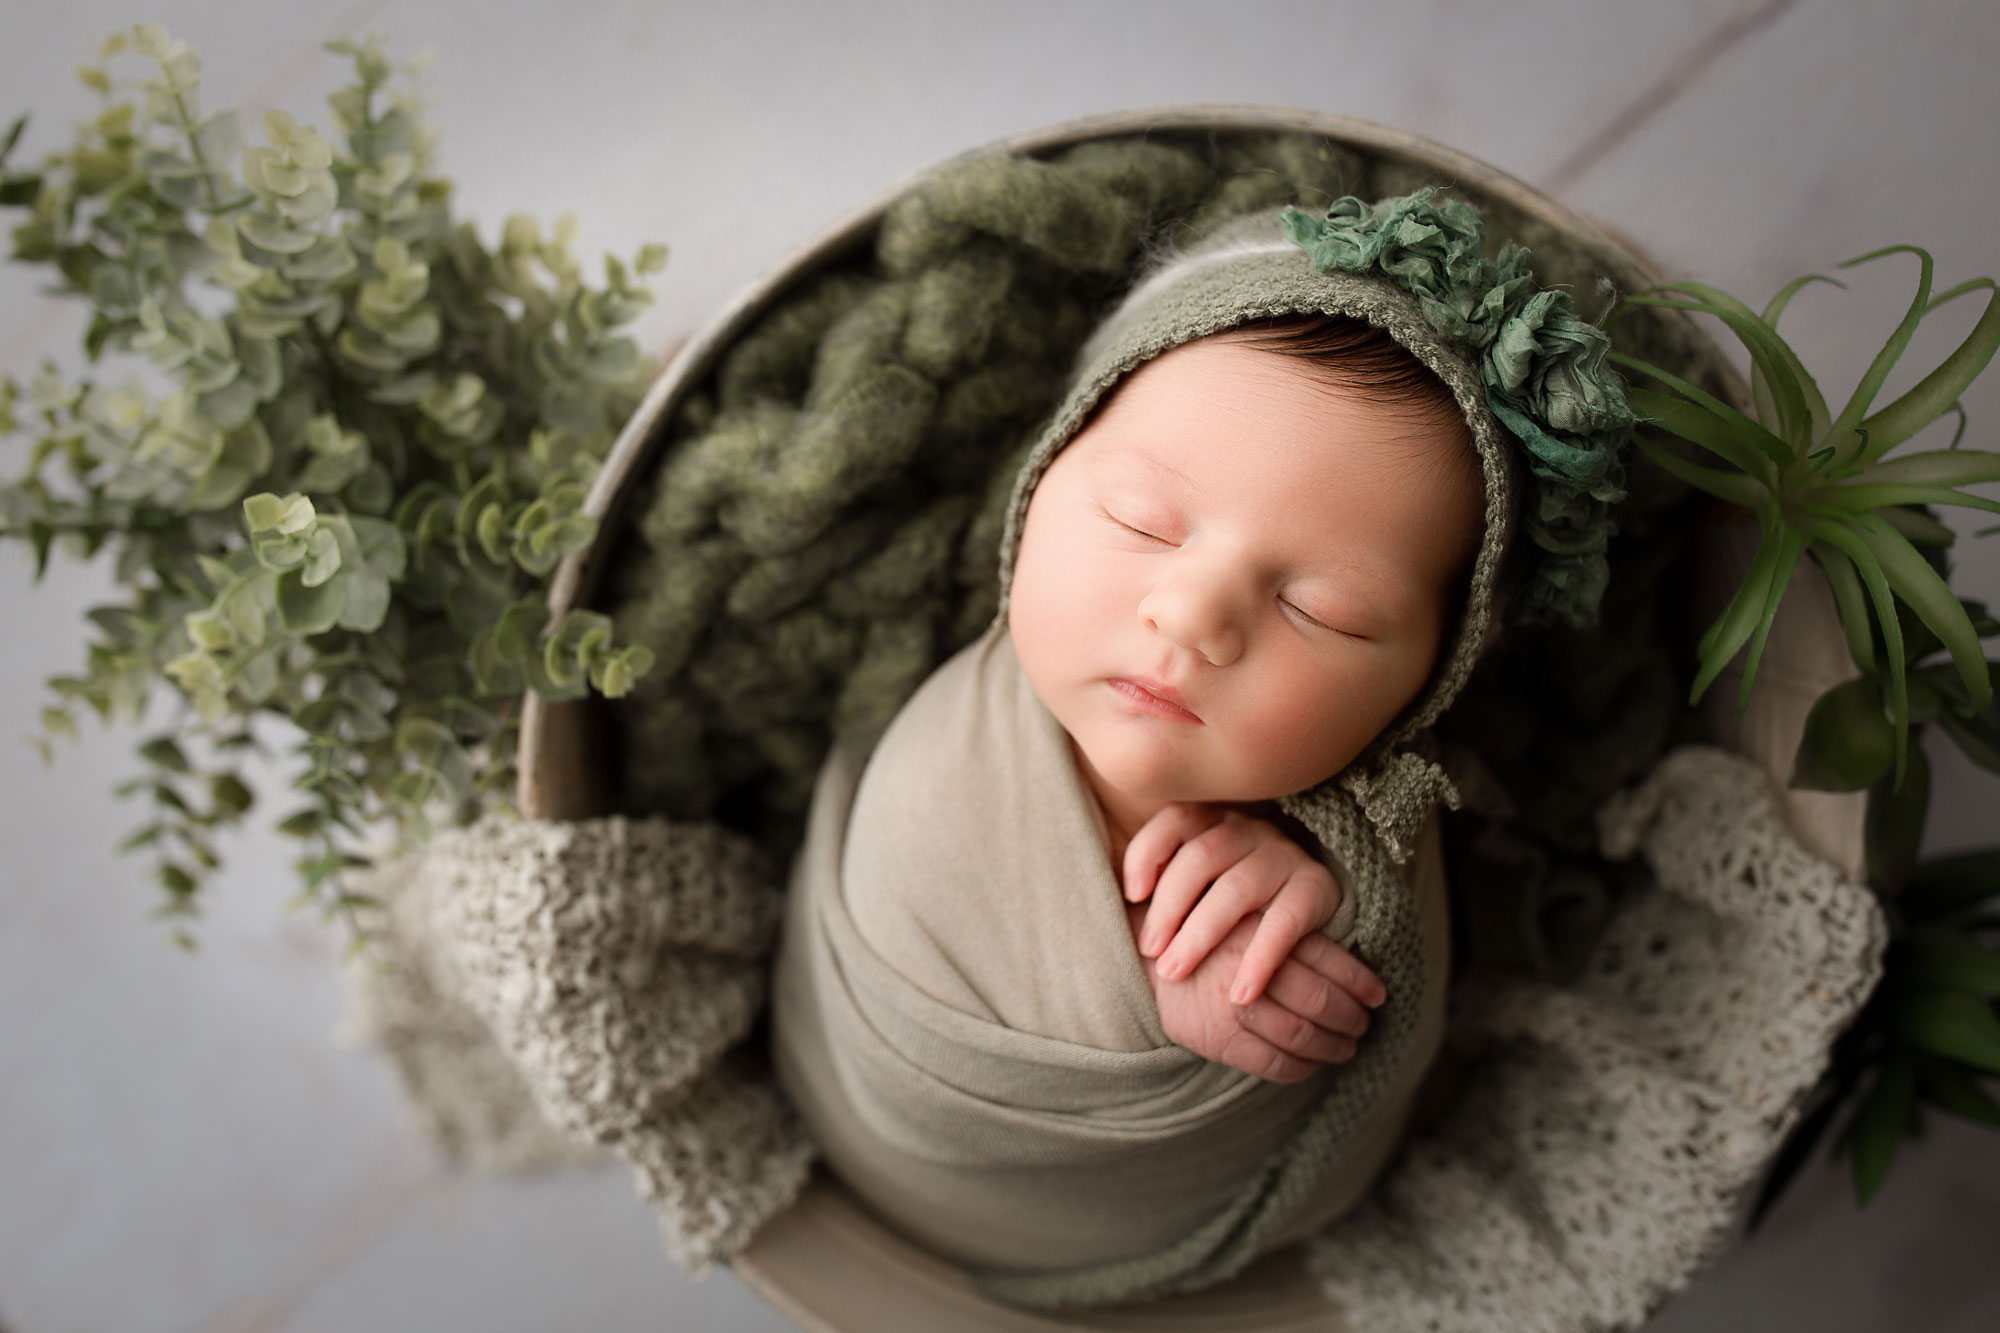 baby girl in green set up in the buckey with greenery easter setup for newborn baby easter eggs baby photo session flemington nj